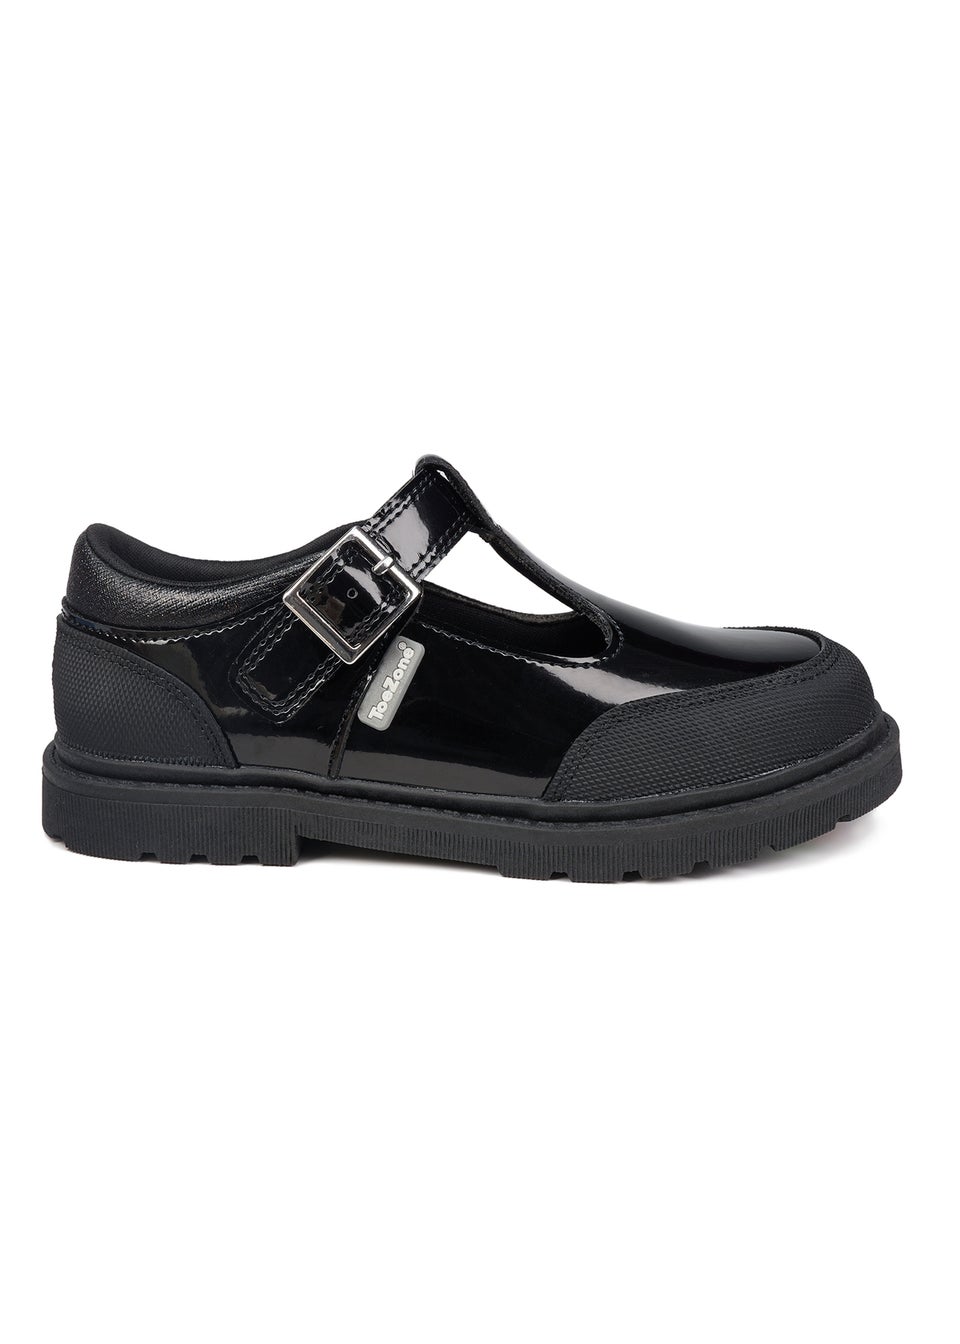 ToeZone Boys Black Ana T Bar Rubber Toe Cap Shoes (Younger 8- Older 3)